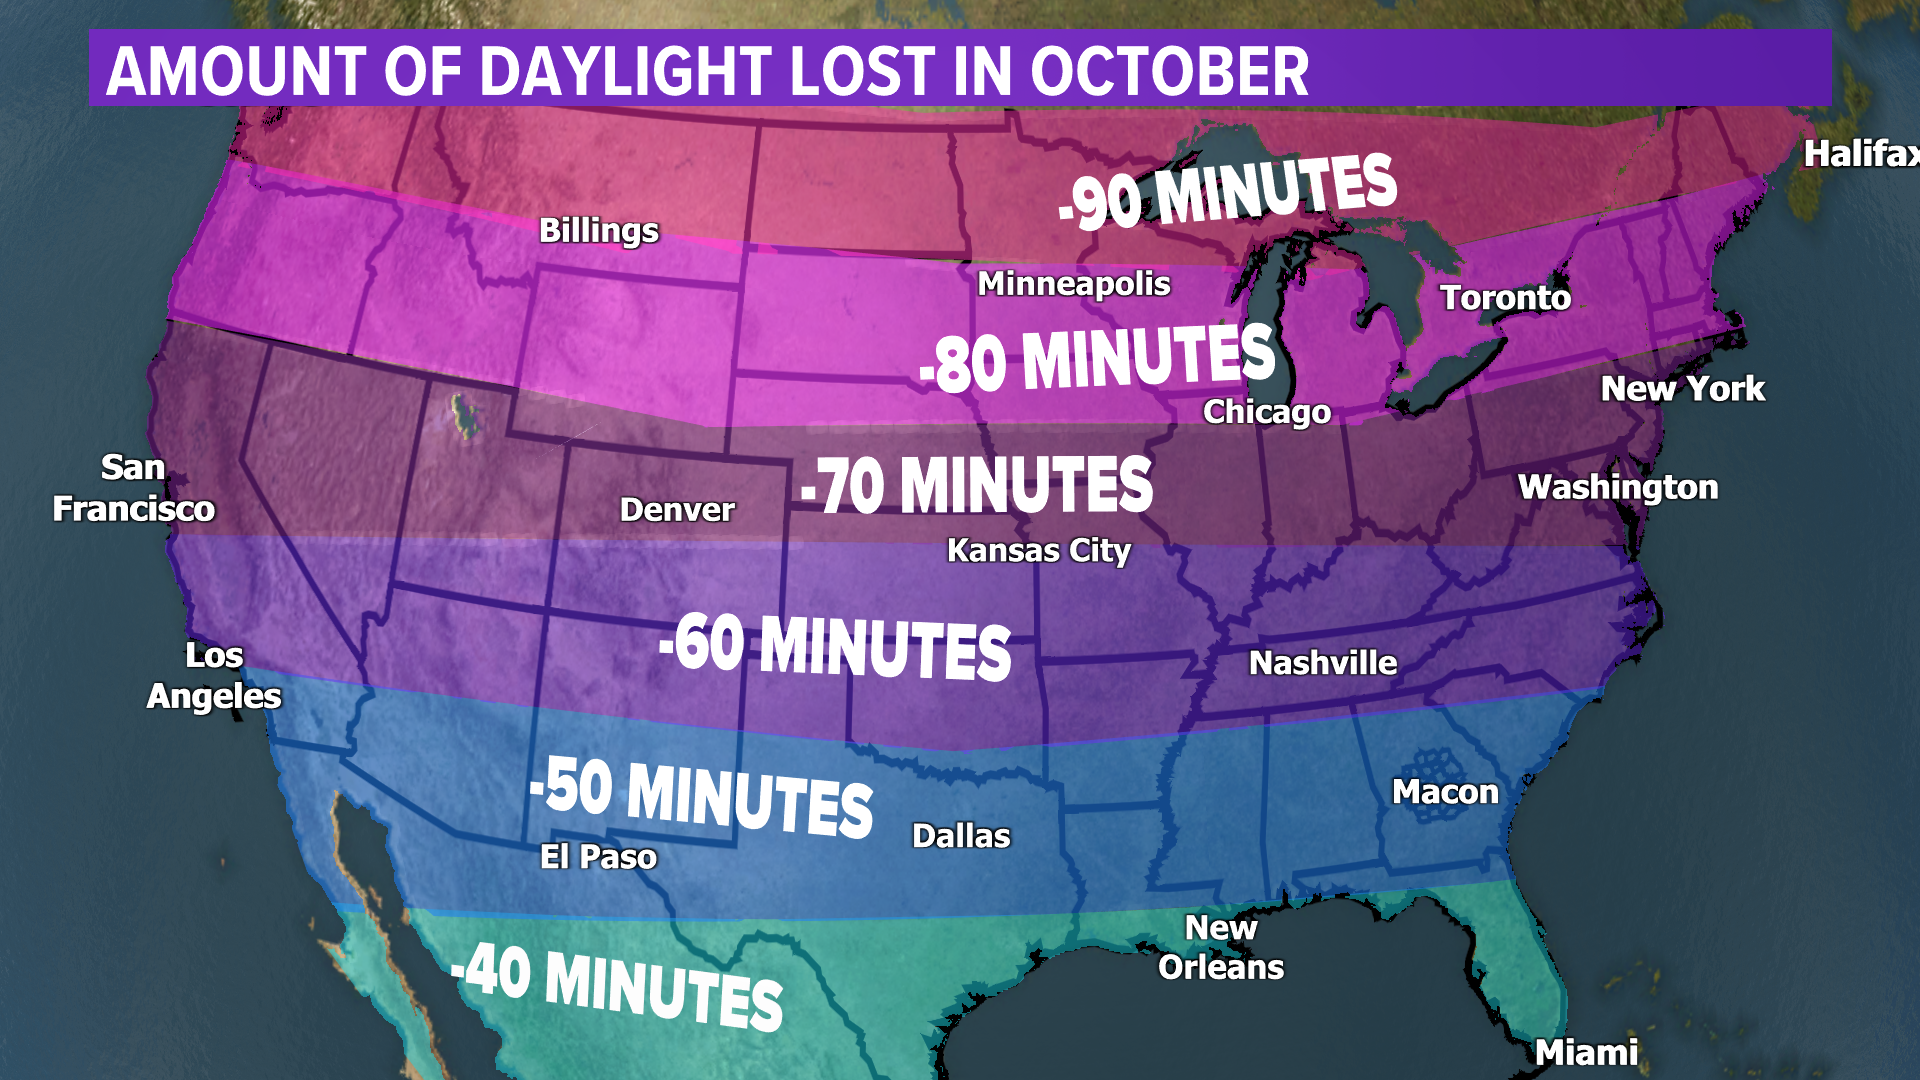 Daylight saving time is still observed and is coming to an end. Meteorologist Taylor Stephenson explains why we lose daylight.